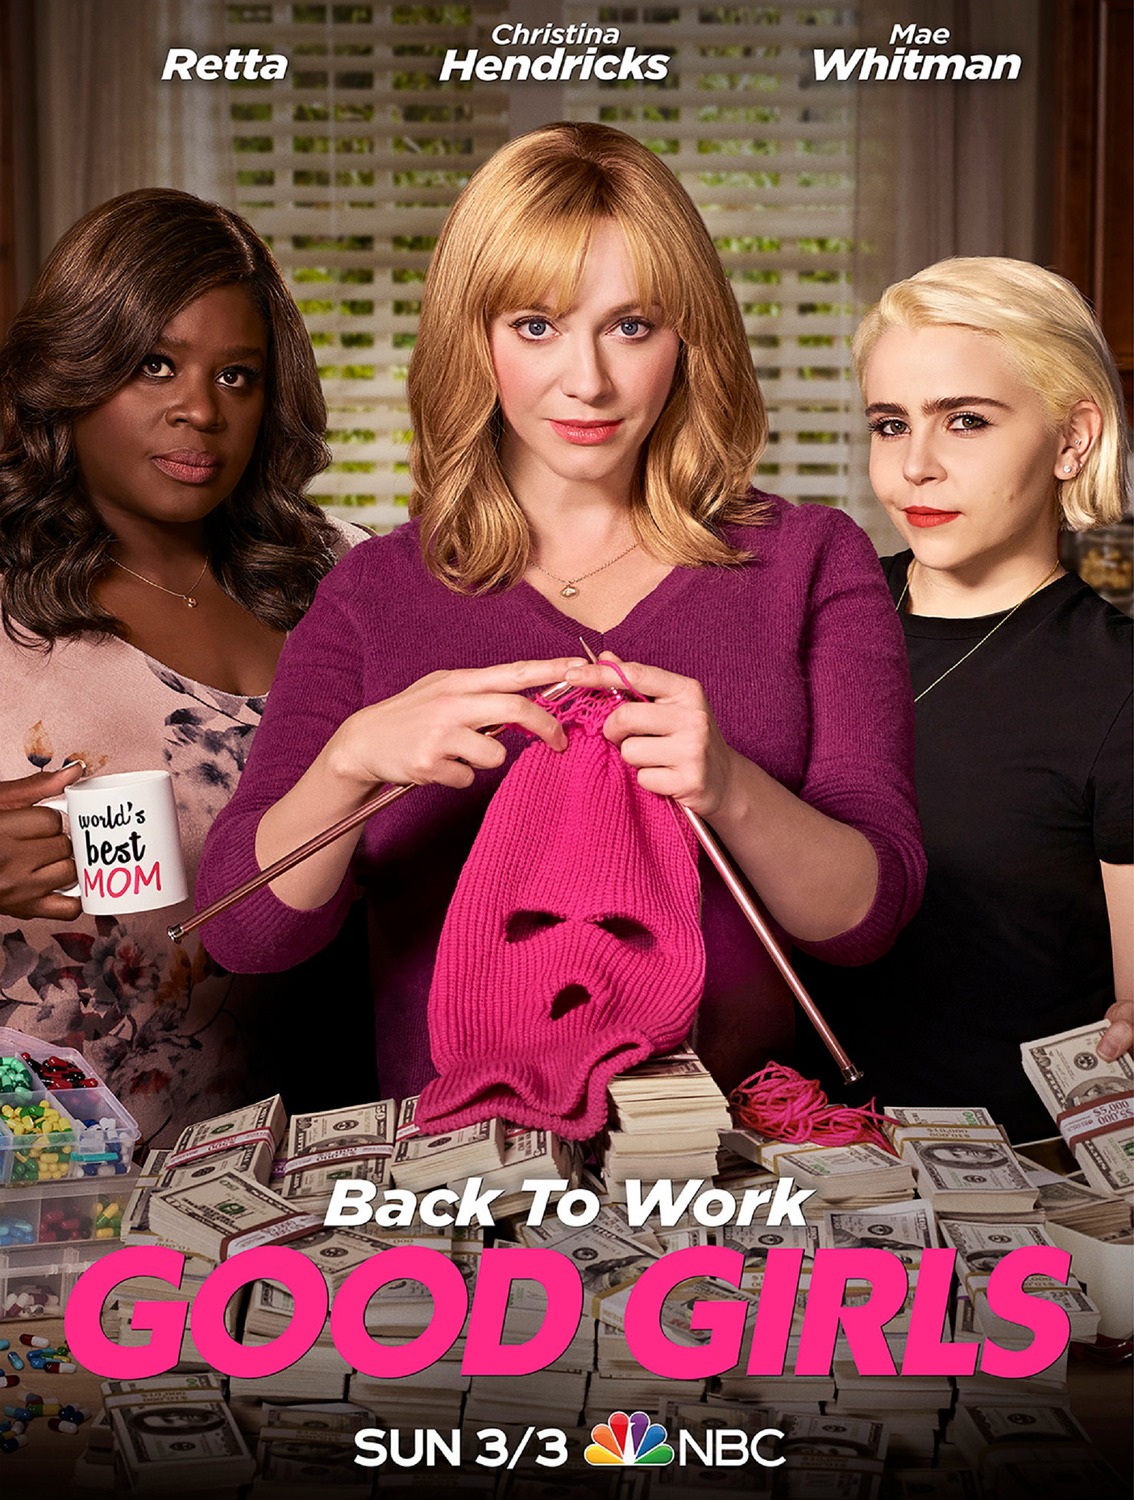 Extra Large TV Poster Image for Good Girls (#2 of 2)